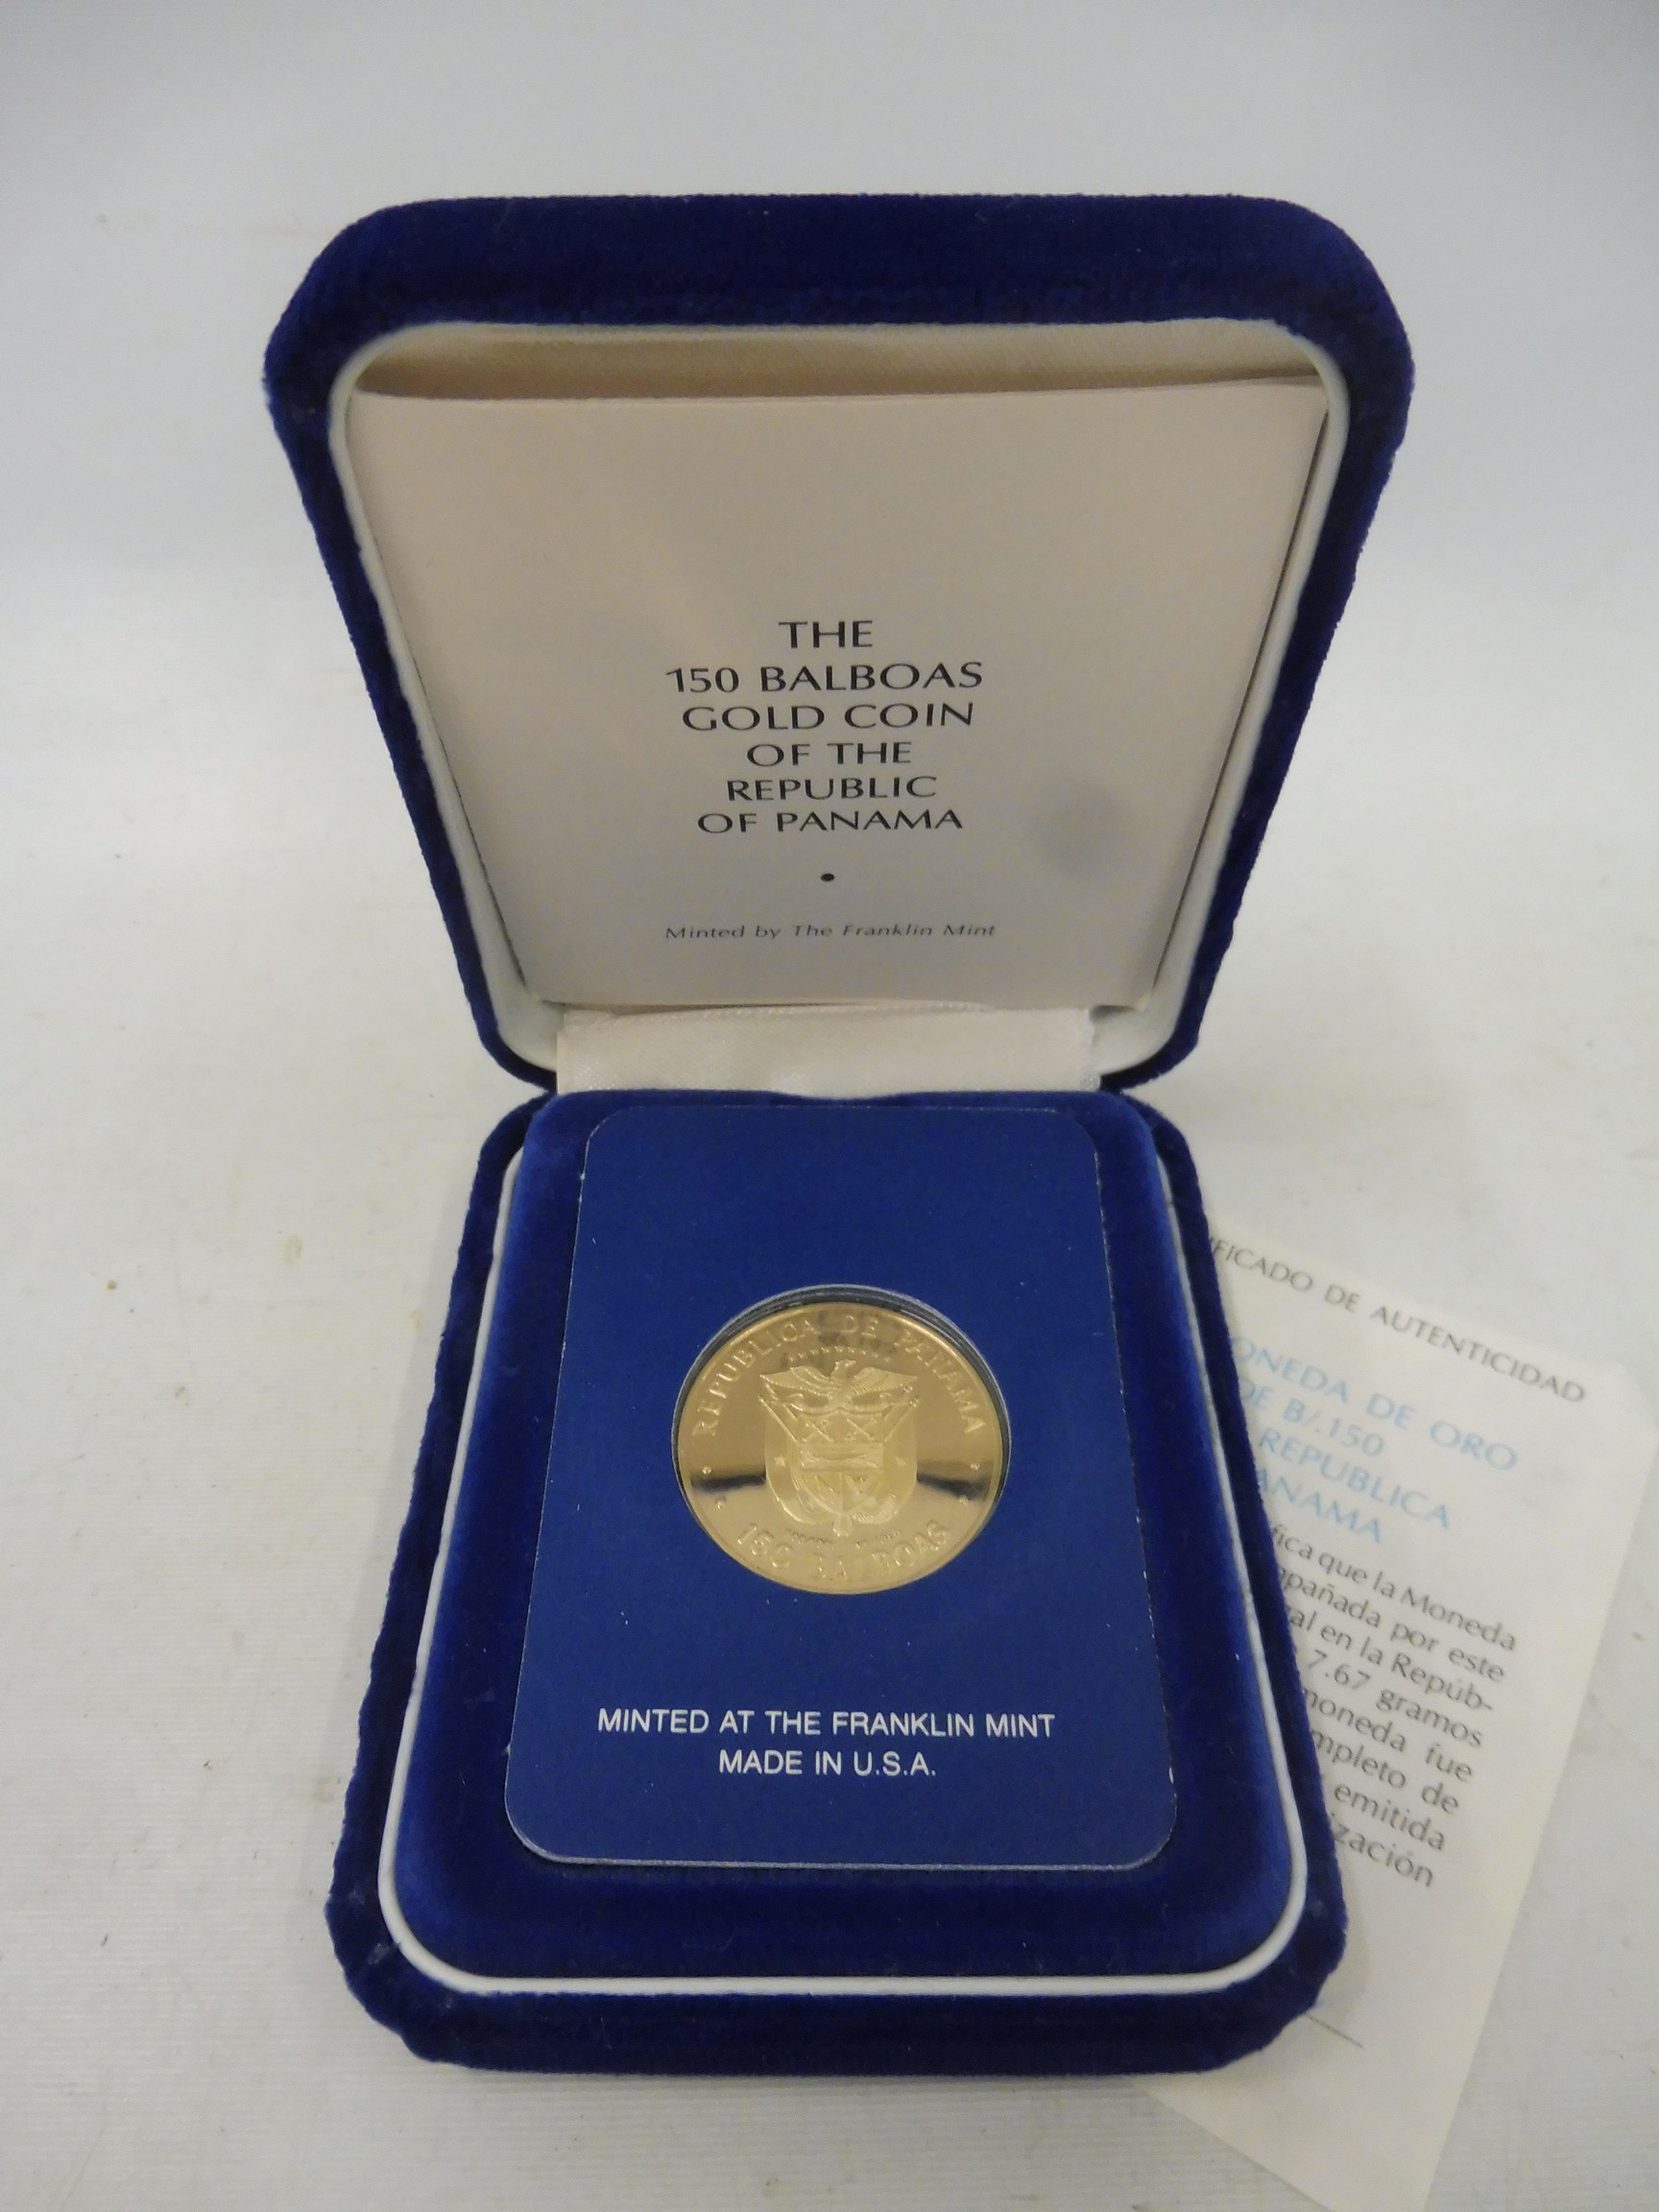 A cased 1980 Franklin Mint Republic of Panama 150 Balboas gold proof coin, with certificate.